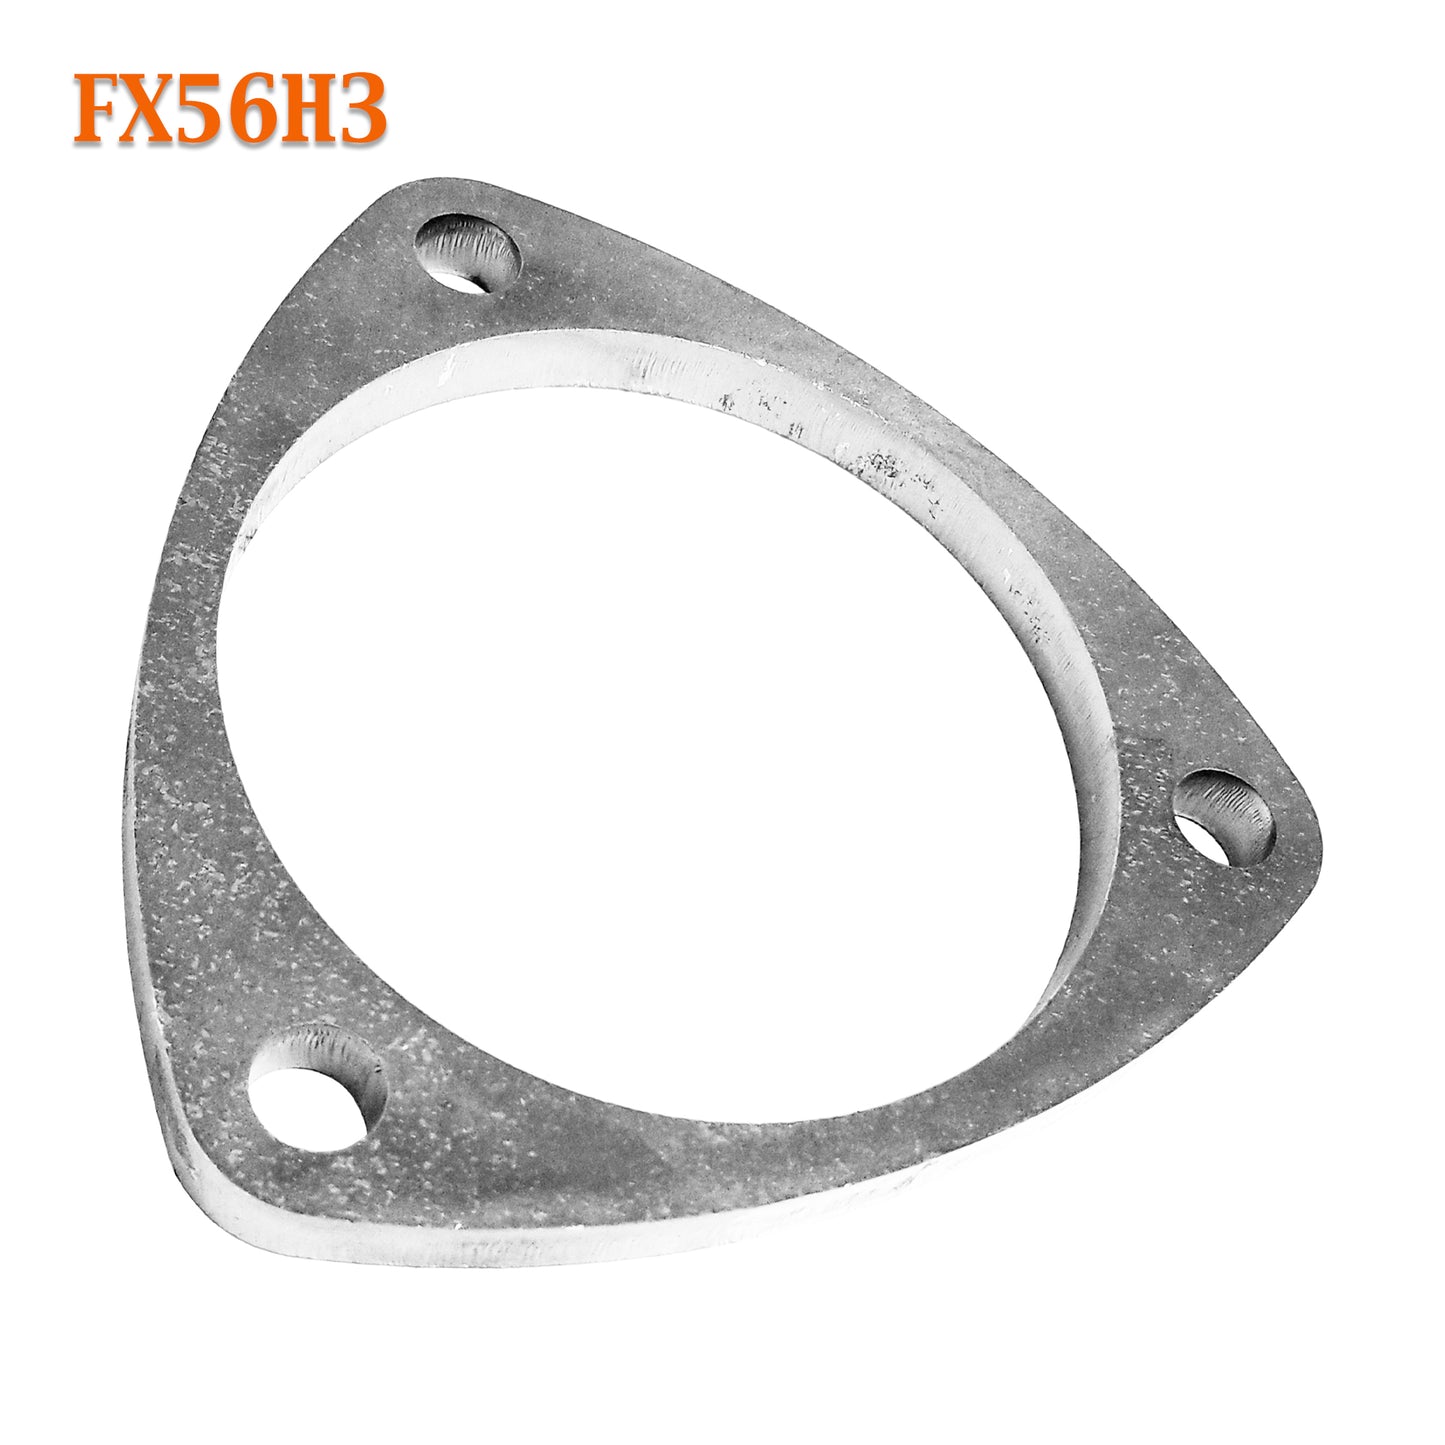 FX56H3 3 1/2" ID Flat Triangle Three Bolt Exhaust Flange For 3.5" Pipe